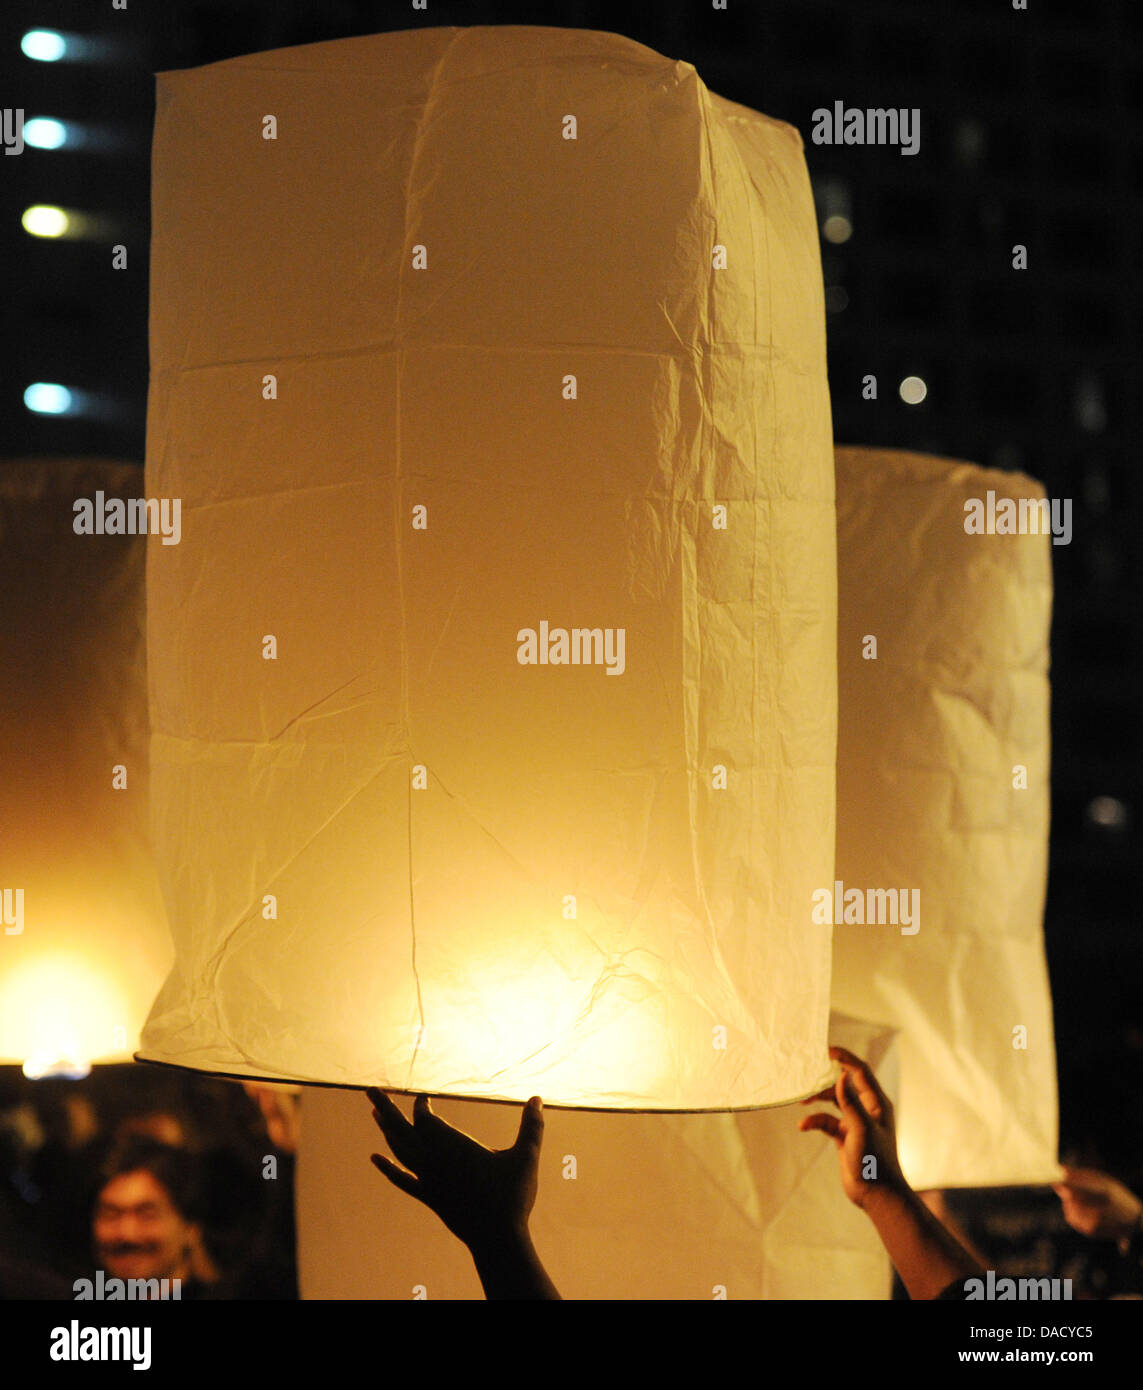 People light paper lanterns called Khom Loi at the Ping river during the festival of lights Loy Krathong in Chiang Mai, Thailand, 10 November 2011. The festival is celebrated in the whole country during full moon of the twelfth month of the year and originates from a Hindu tradition. Photo: Jens Kalaene Stock Photo